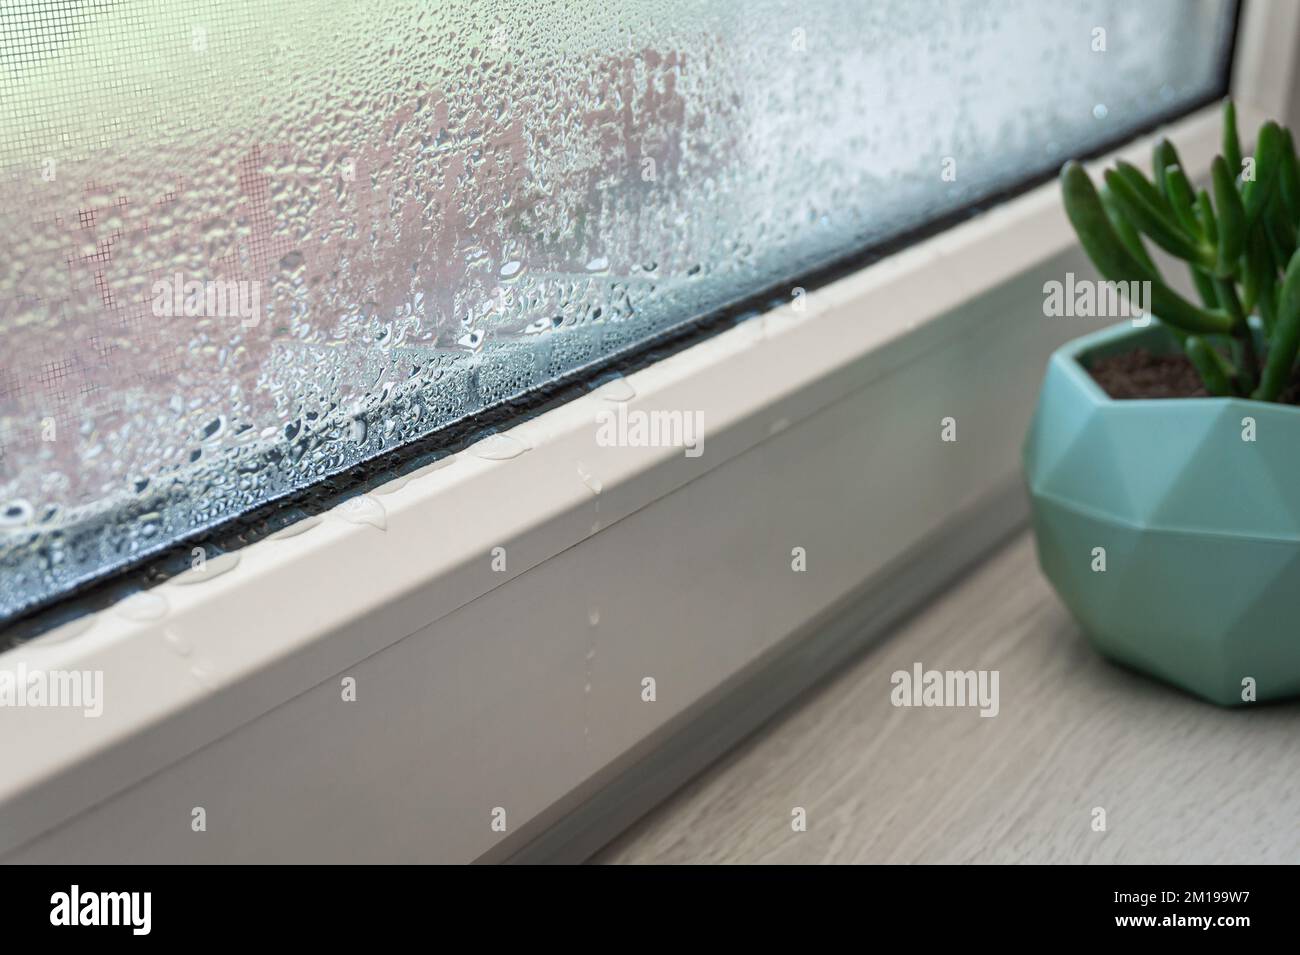 Close-up of condensation on PVC window, white plastic window, houseplant on the background, selective focus. Indoor plants and humidity concept. Stock Photo